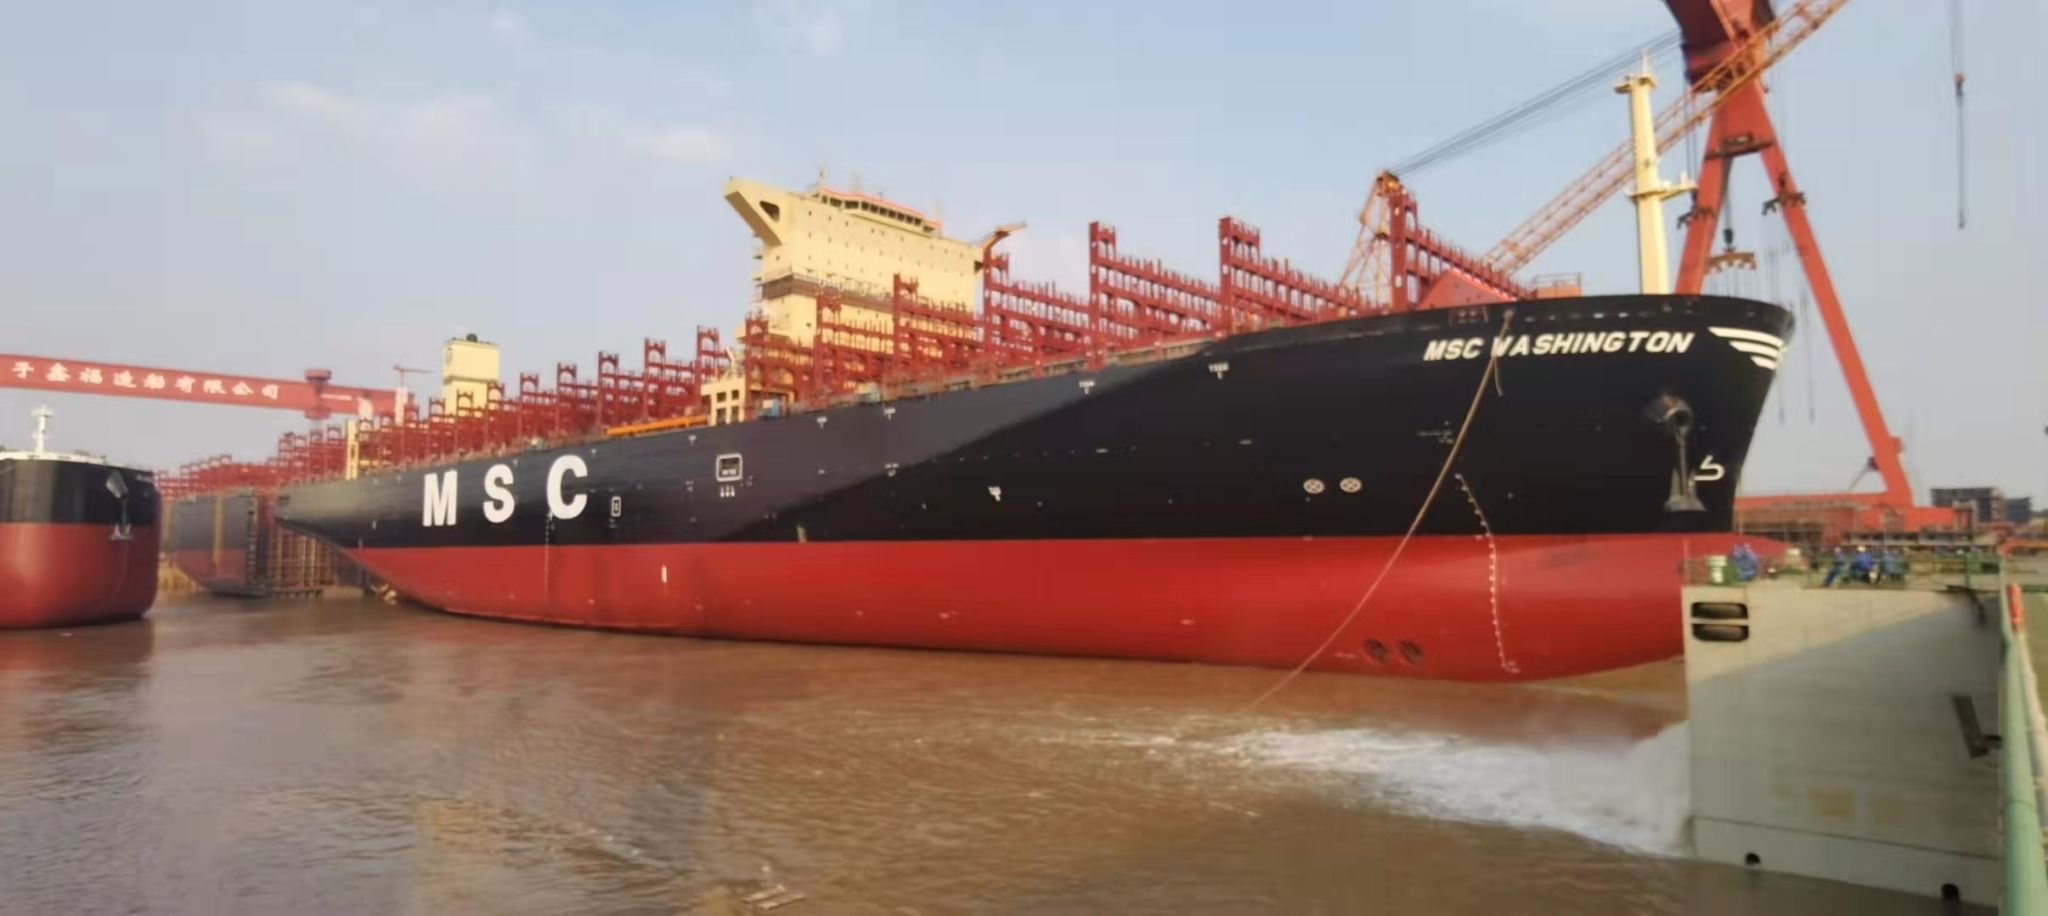 LNG-powered MSC Washington launched in China